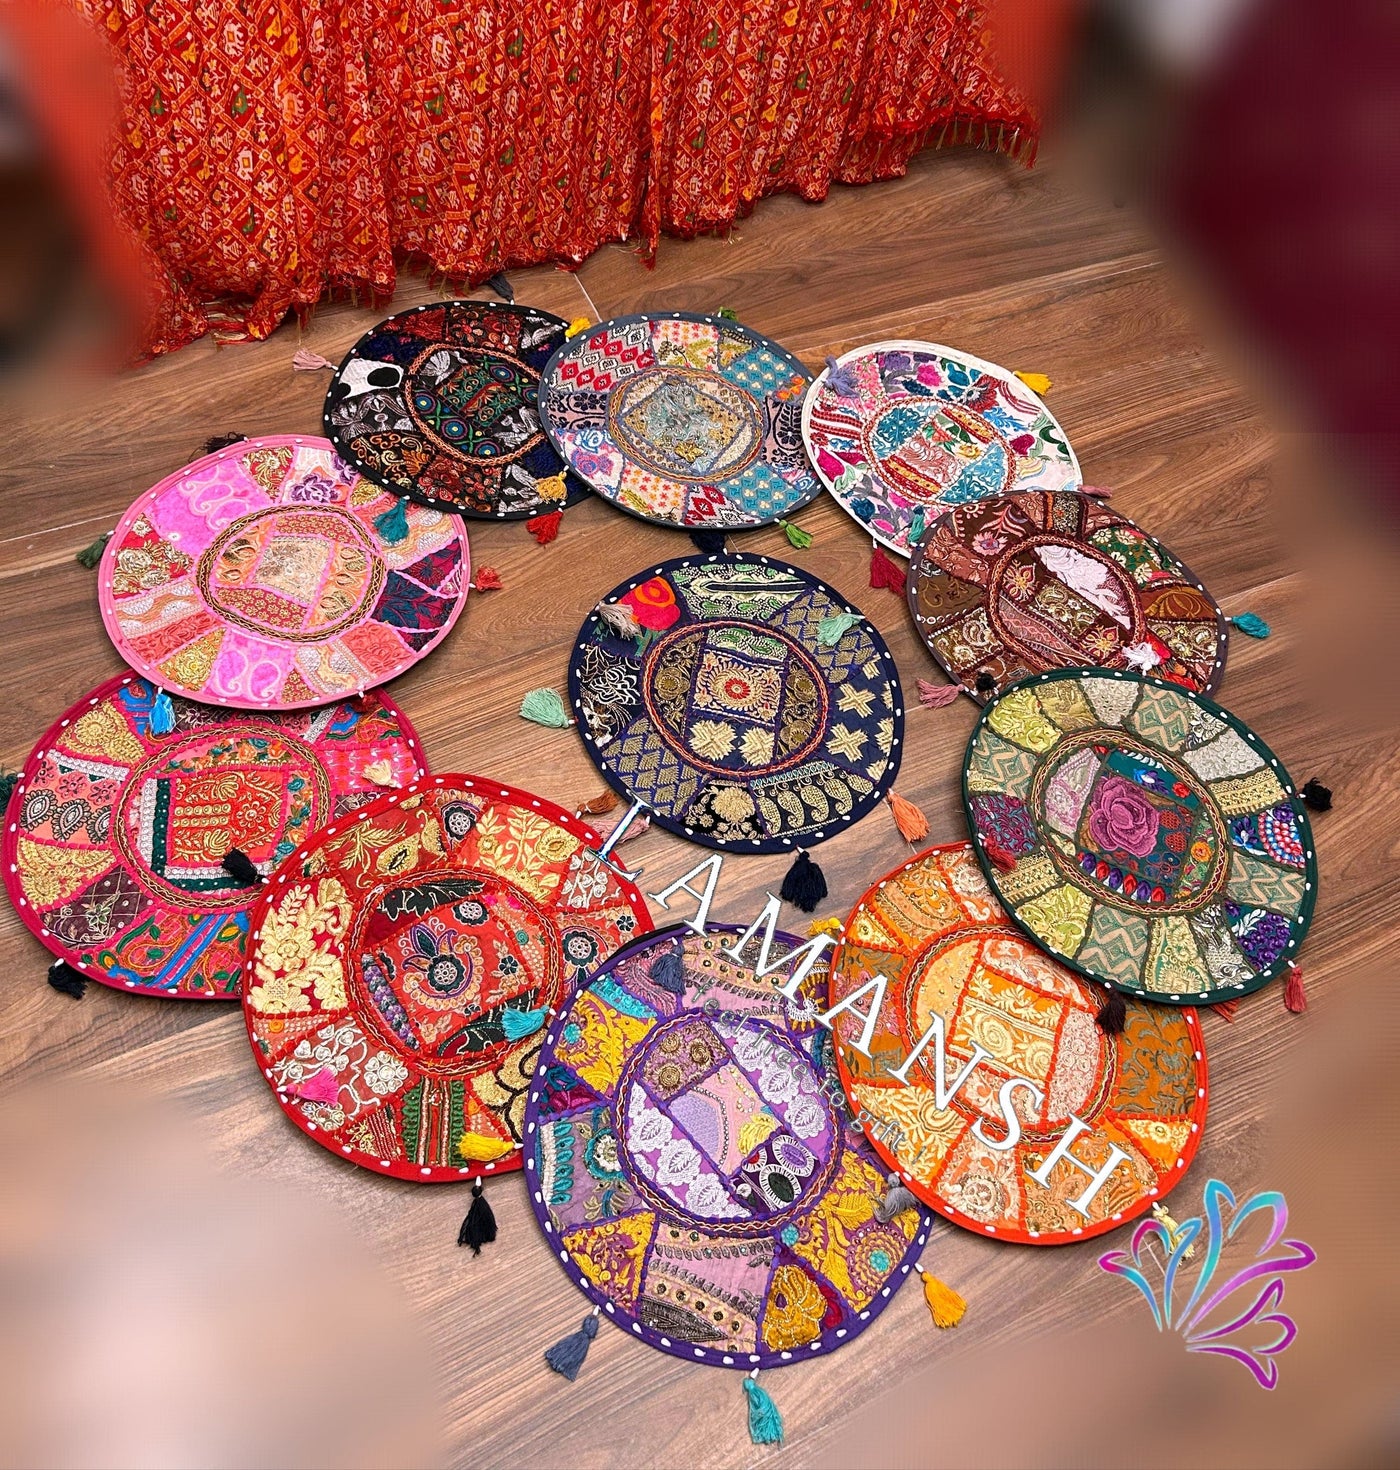 Lamansh cushion covers Special diwali Launch 🔥 Round patchwork runners / mat runners for dining table, living room, modern home decor | Table Runners for festival decorations 🔥